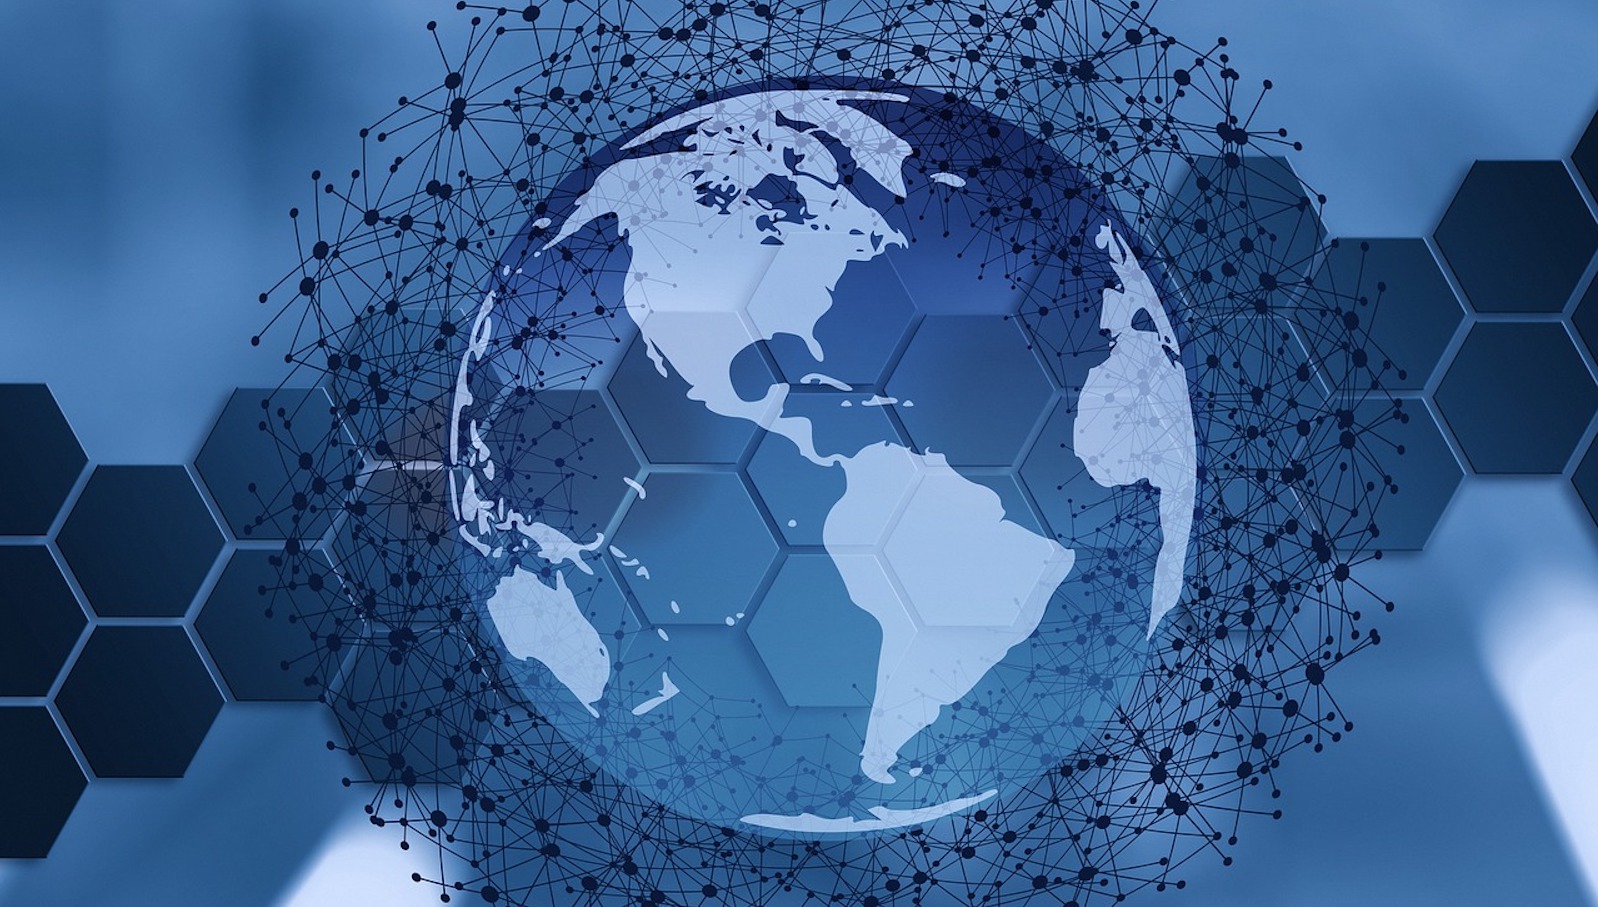 A blue and white globe in the middle of the screen surrounded by interconnected lines against a blurred pattern also with navy hexagons